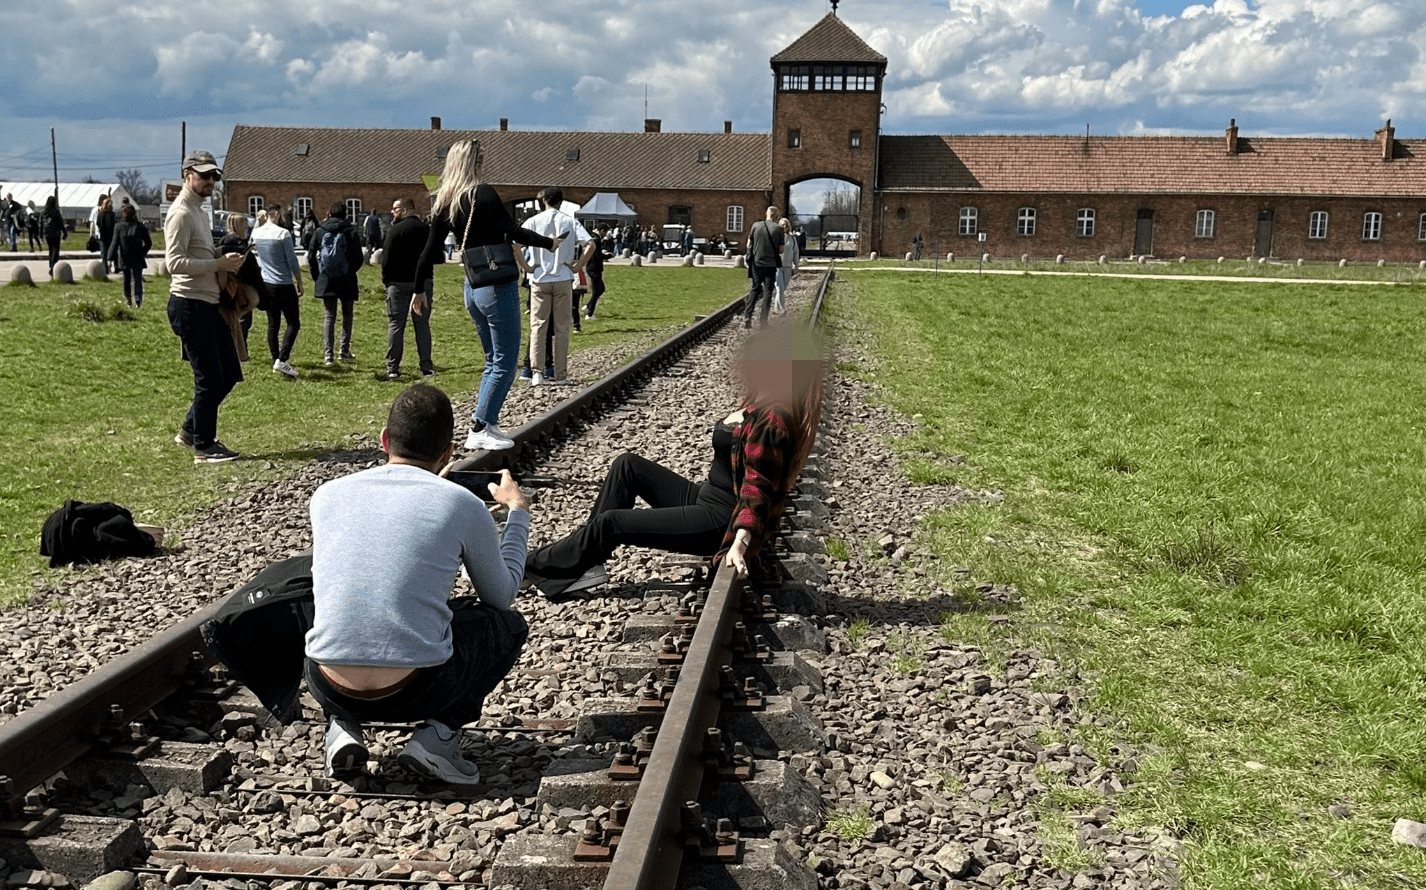 Woman sparks outrage after posing for photos on Auschwitz train tracks